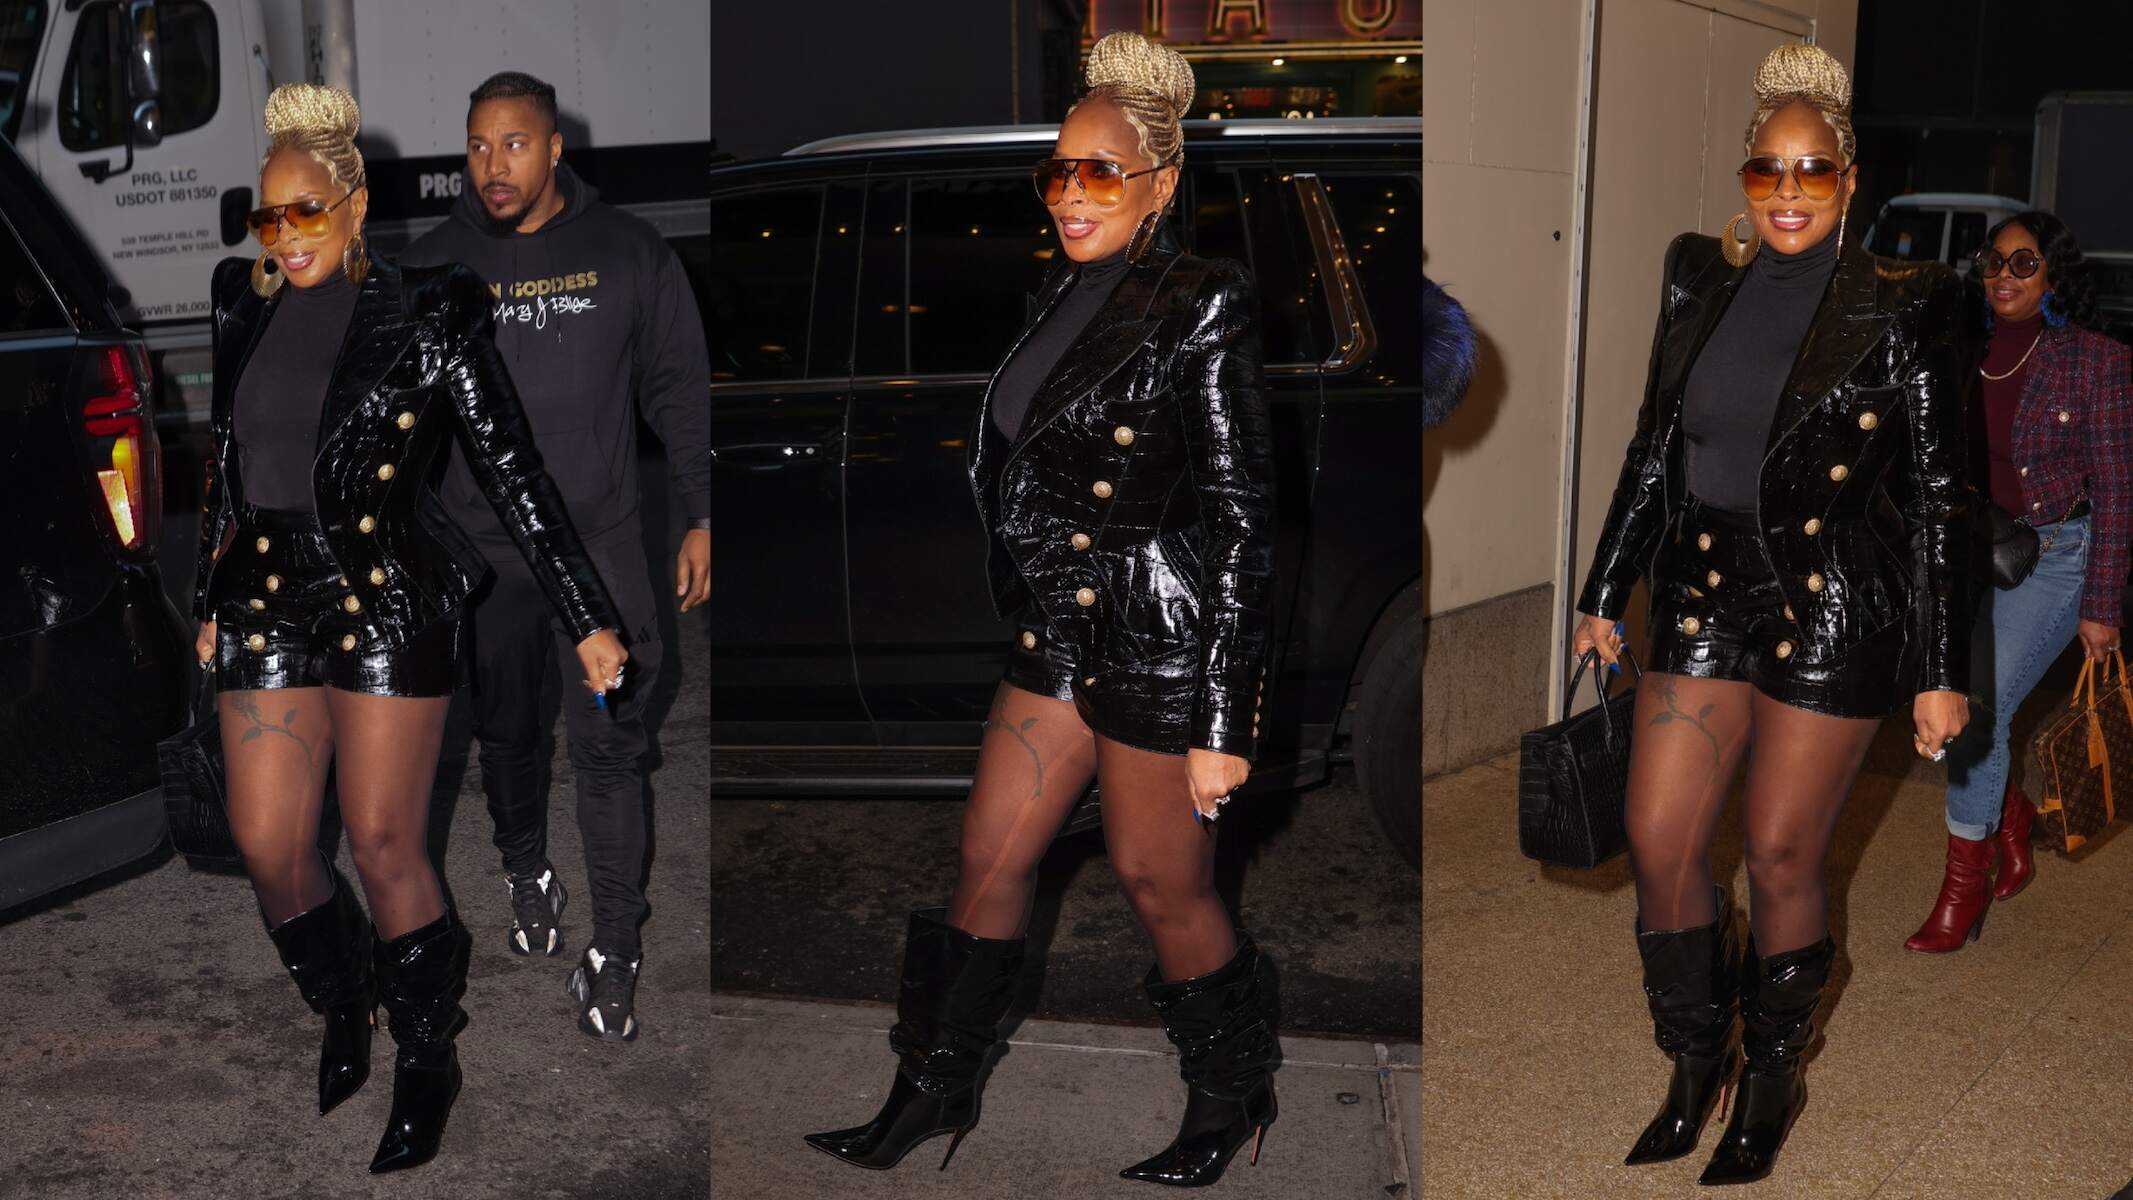 Singer Mary J. Blige arrives at CBS studios in NYC wearing a patent leather jacket and shorts